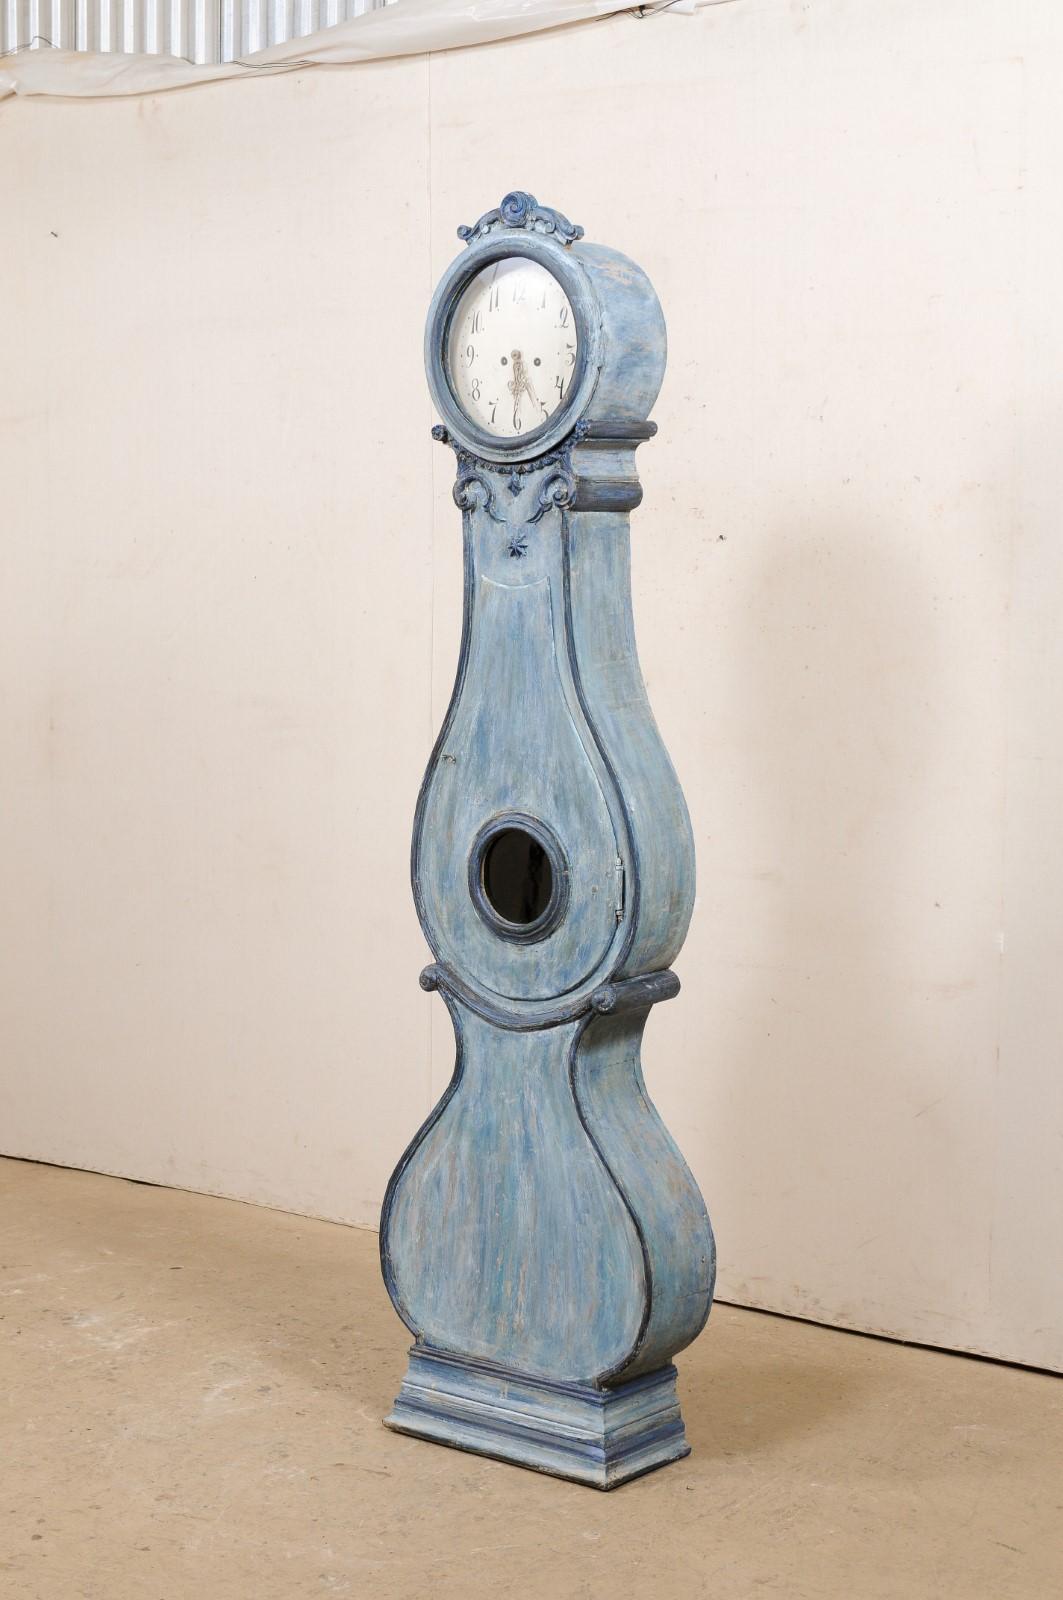 Antique Swedish Fryksdahl Grandfather Clock w/Shapely Body in Blue Hues 3